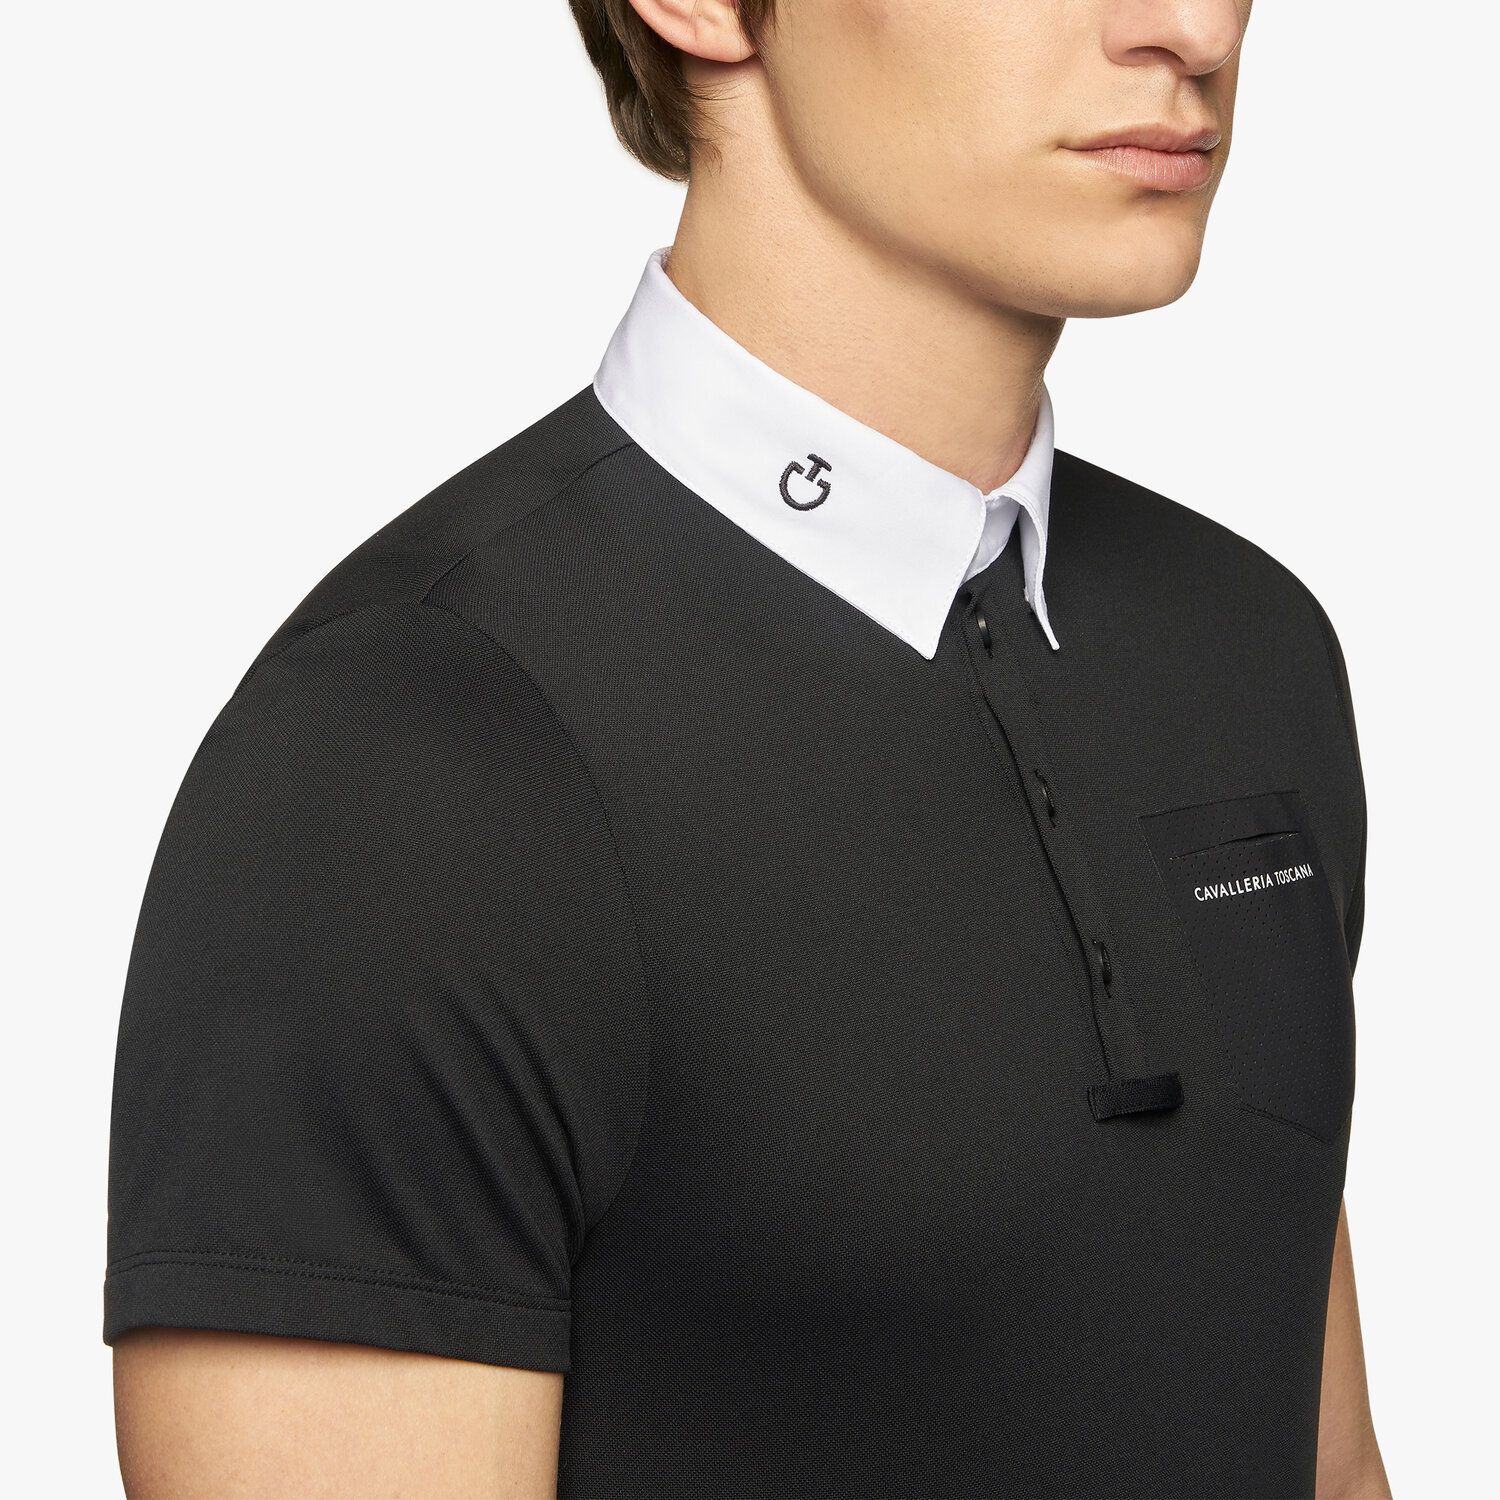 Men's performance piqué knit polo shirt with buttons